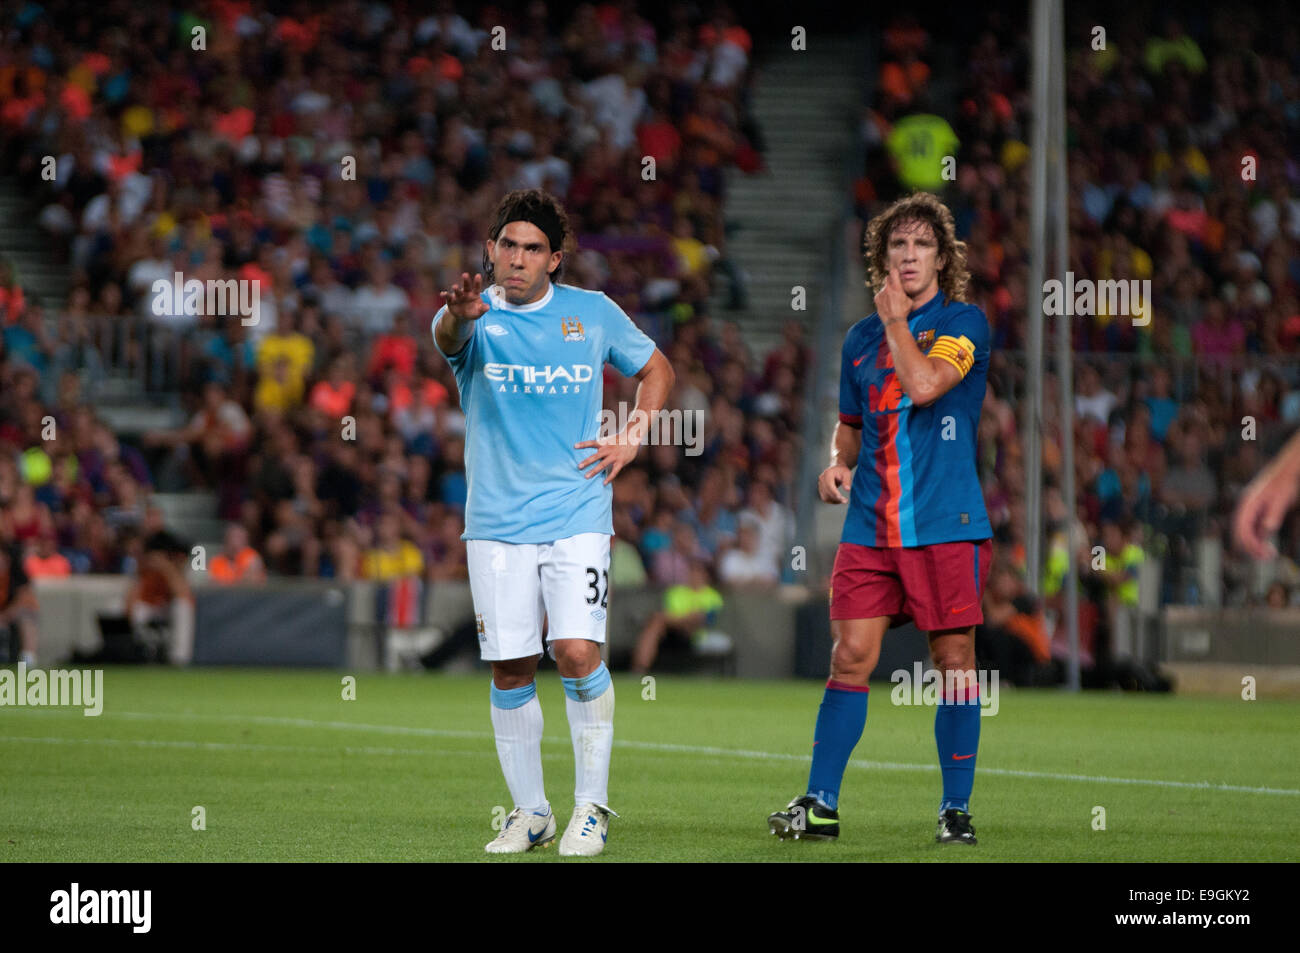 BARCELONA - AUG 19: Carlos Tevez, Manchester City player, plays against Carles Puyol, of F.C Barcelona. Joan Gamper Throphy. Stock Photo